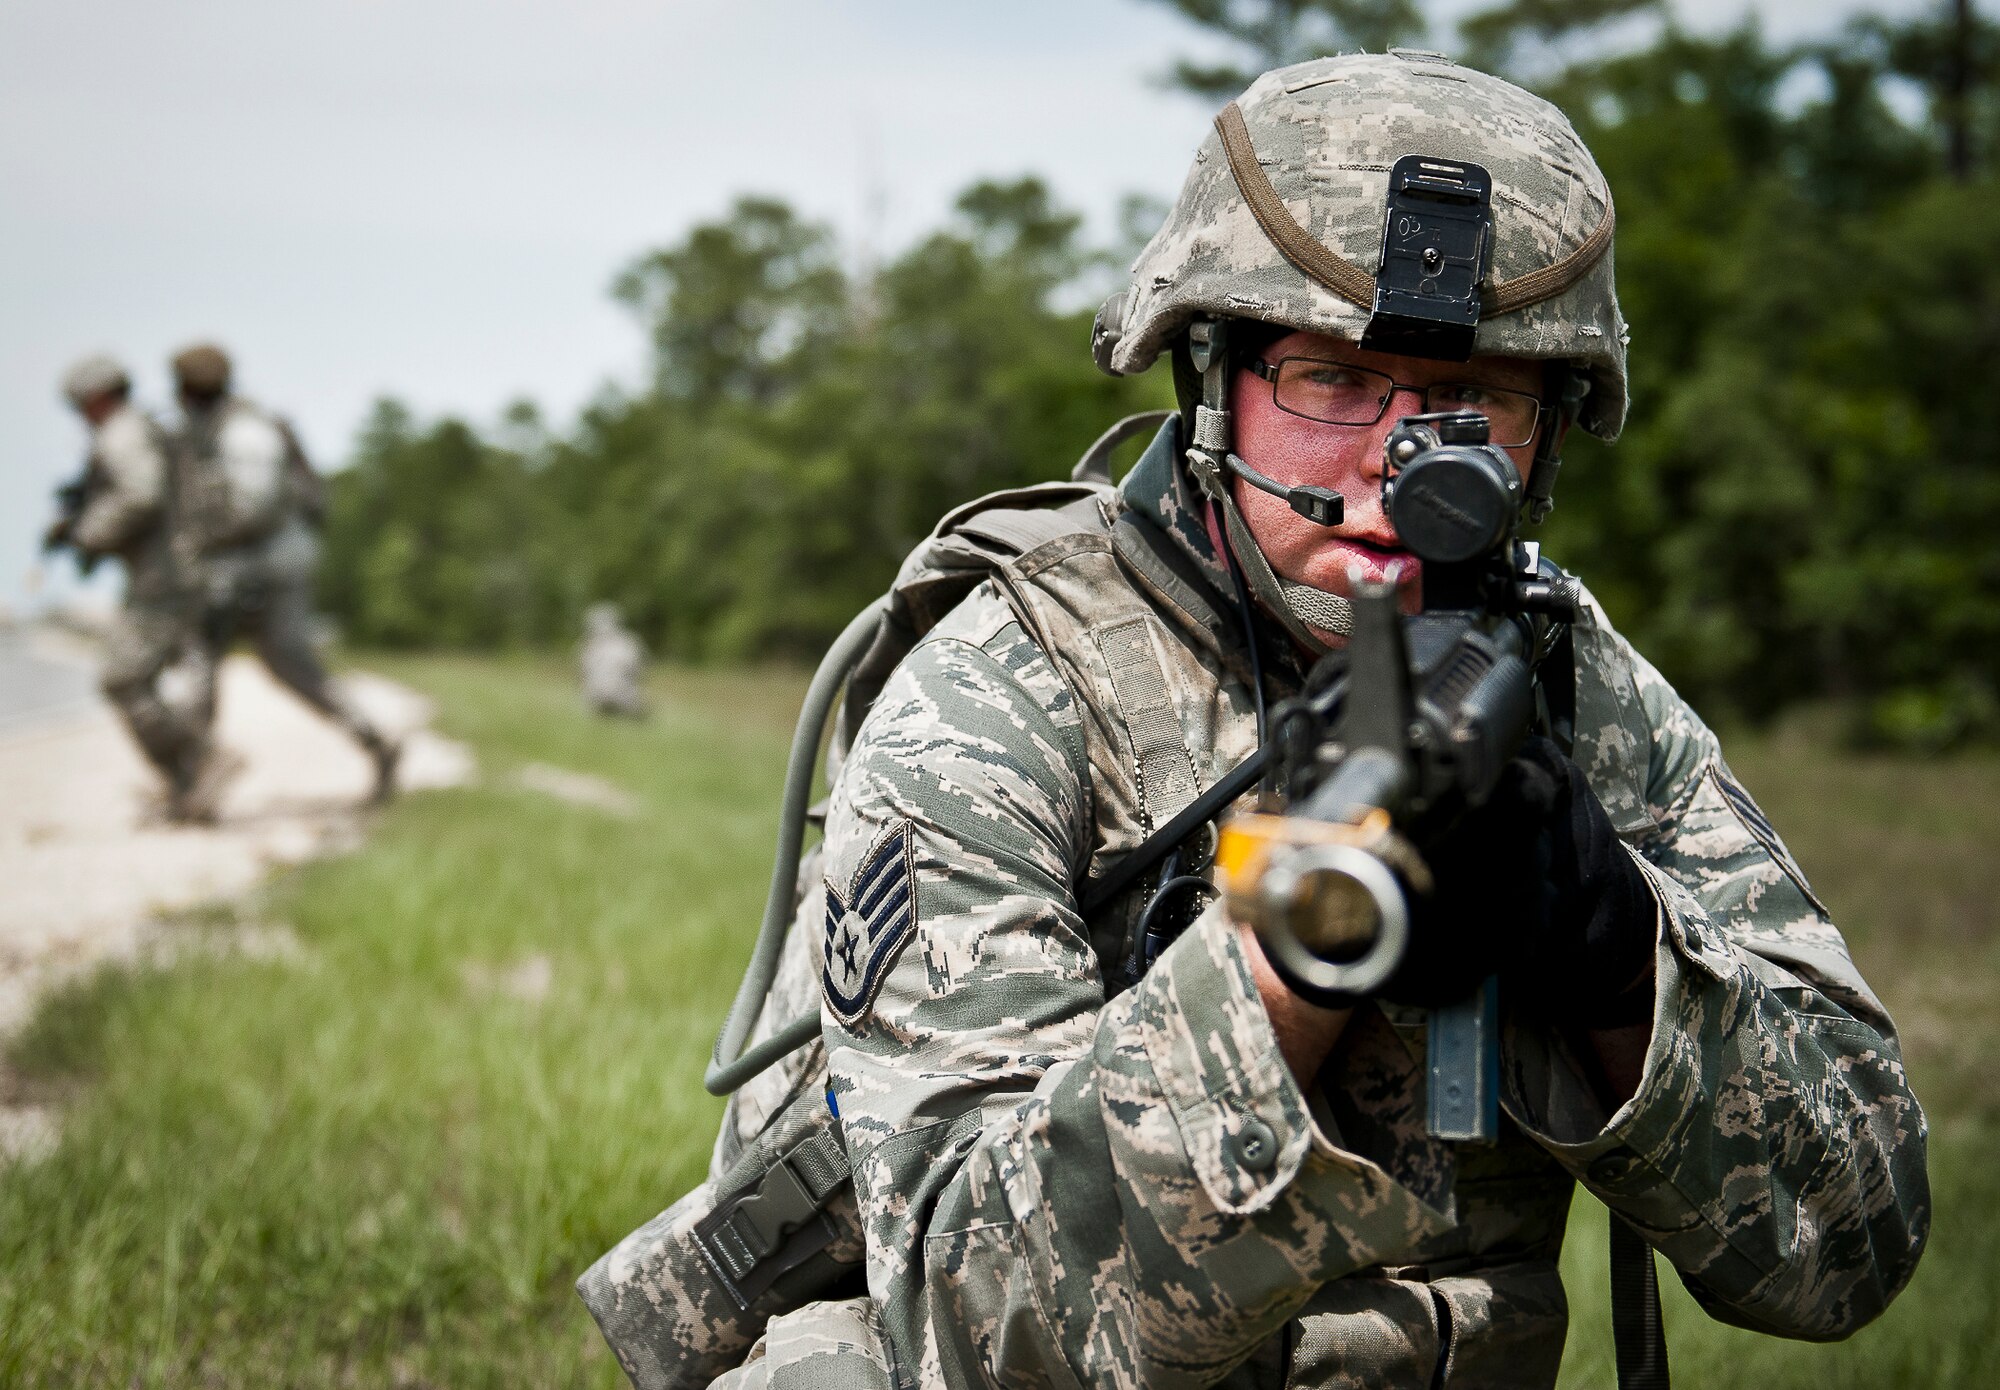 A security forces staff sergeant watches for attacks as his patrol crosses a road during a dismounted mission as part of the three-day Brave Defender field training exercise May 19 at Eglin Air Force Base, Fla.  The exercise is the culmination of Air Force Materiel Command’s six-week security forces deployment training, administered by the 96th Ground Combat Training Squadron. GCTS instructors teach 10 training classes a year, which consists of improvised explosive device detection and reaction, operating in an urban environment, mission planning, land navigation and casualty care and more. More than 140 active-duty and National Guard Airmen attended this training. (U.S. Air Force photo/Samuel King Jr.)